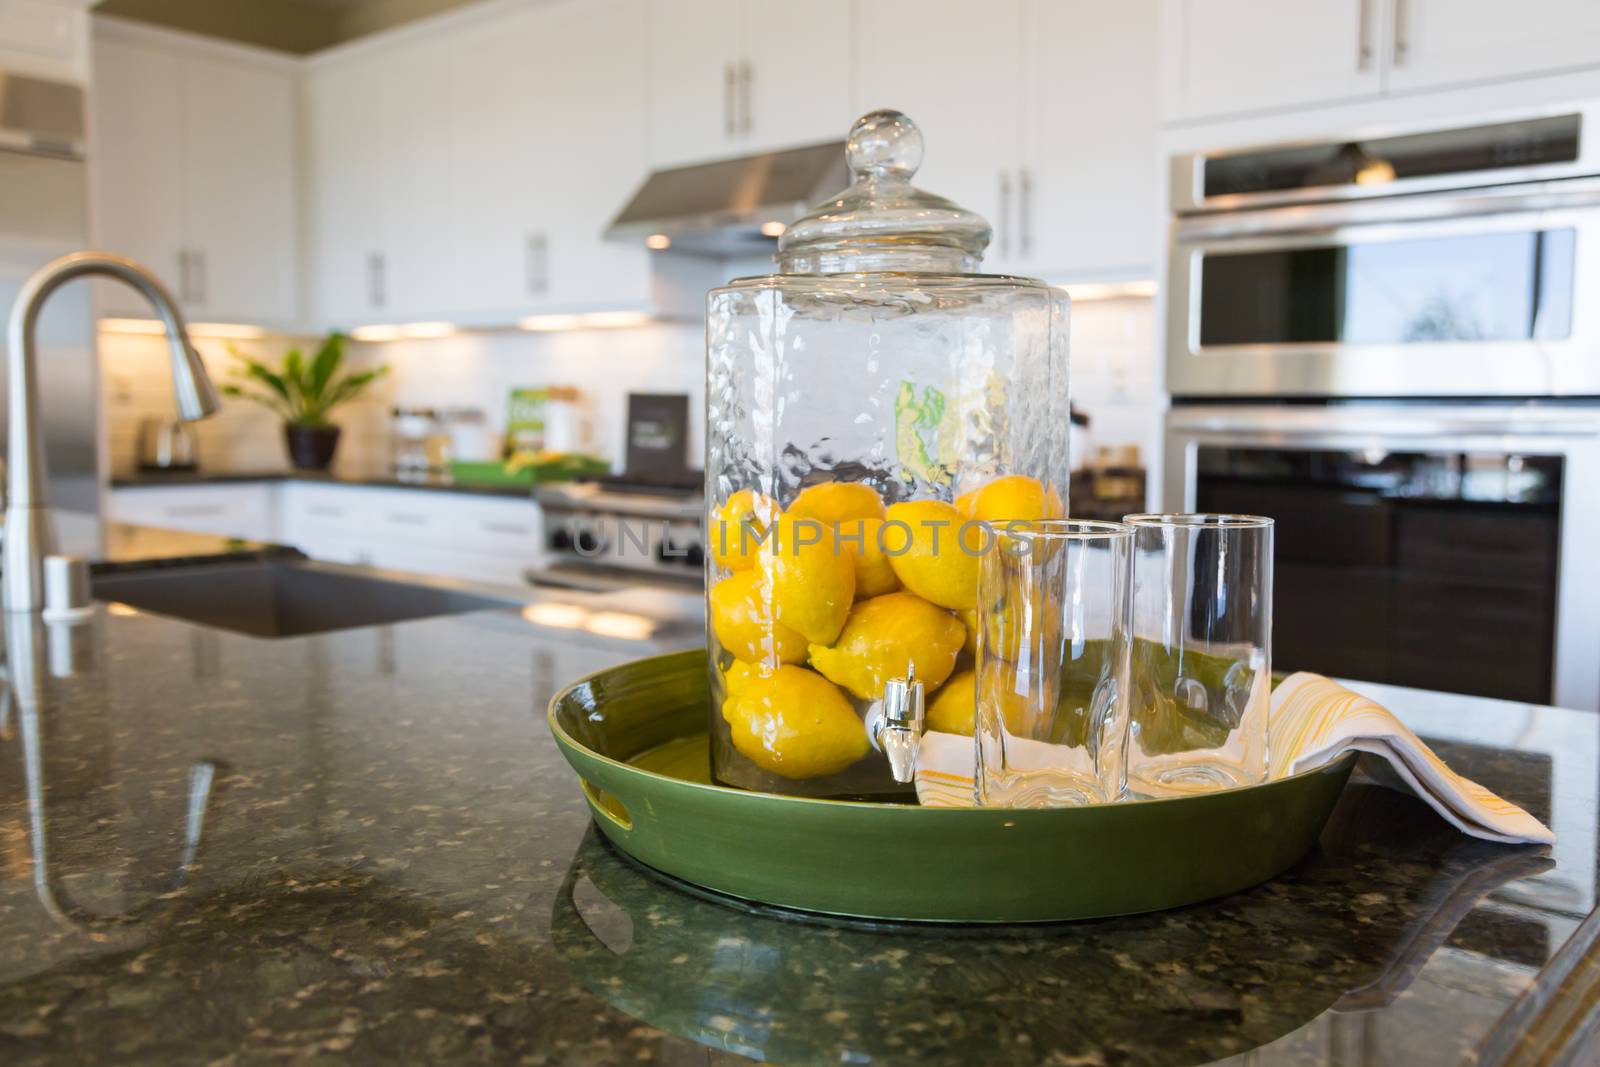 Abstract of Interior Kitchen Counter with Lemon Filled Pitcher and Drinking Glasses. by Feverpitched